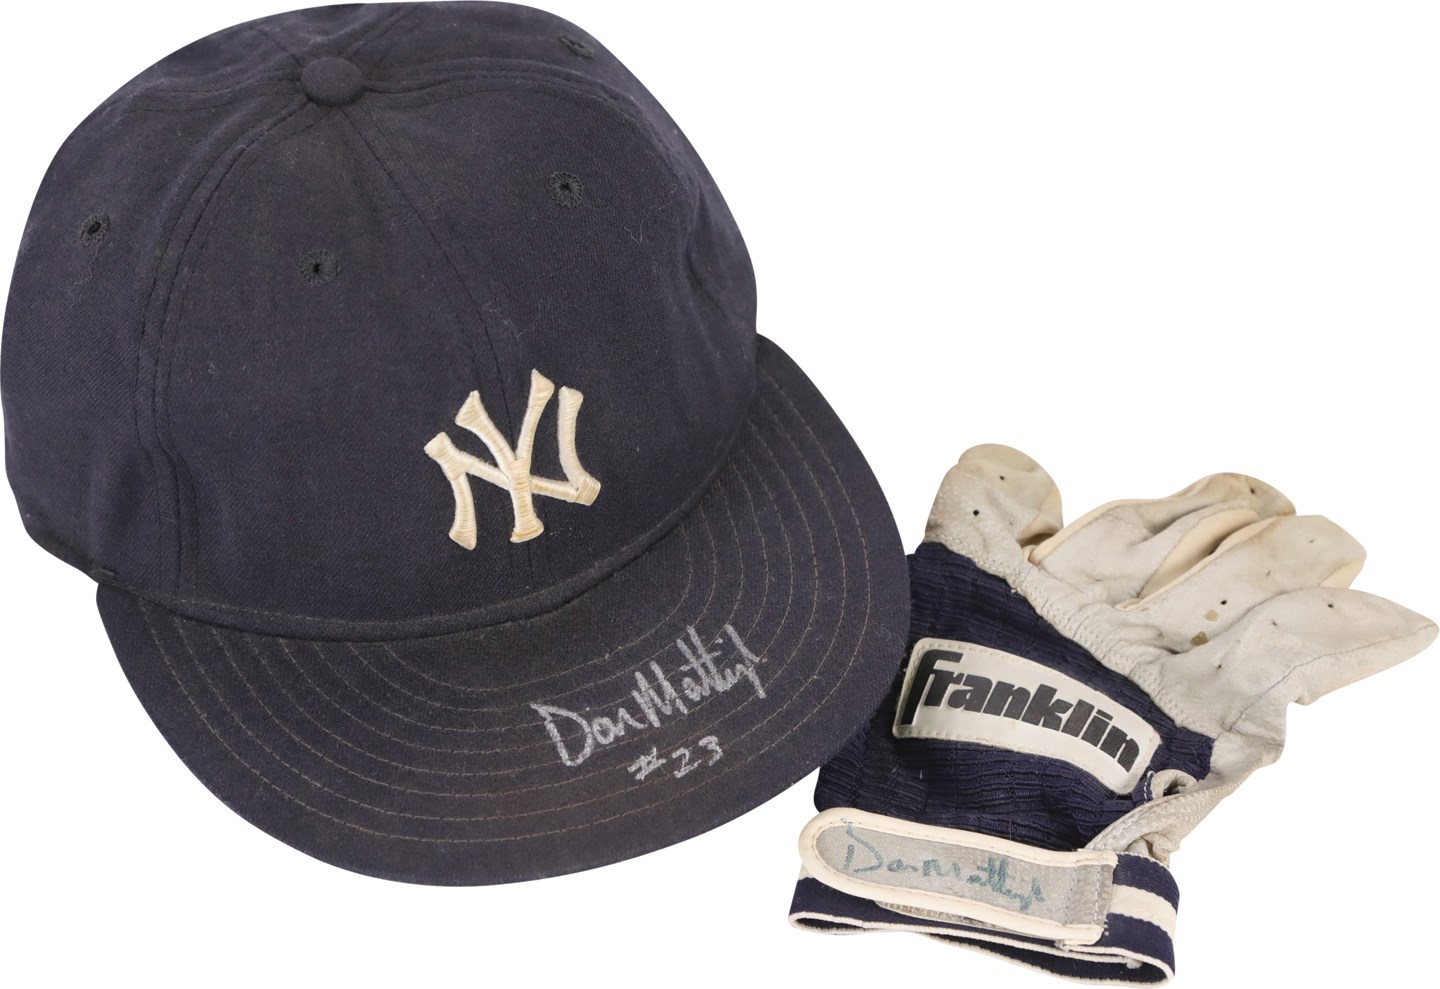 - 1985 Don Mattingly Rookie New York Yankees Game Used Hat and Signed Batting Glove (PSA)